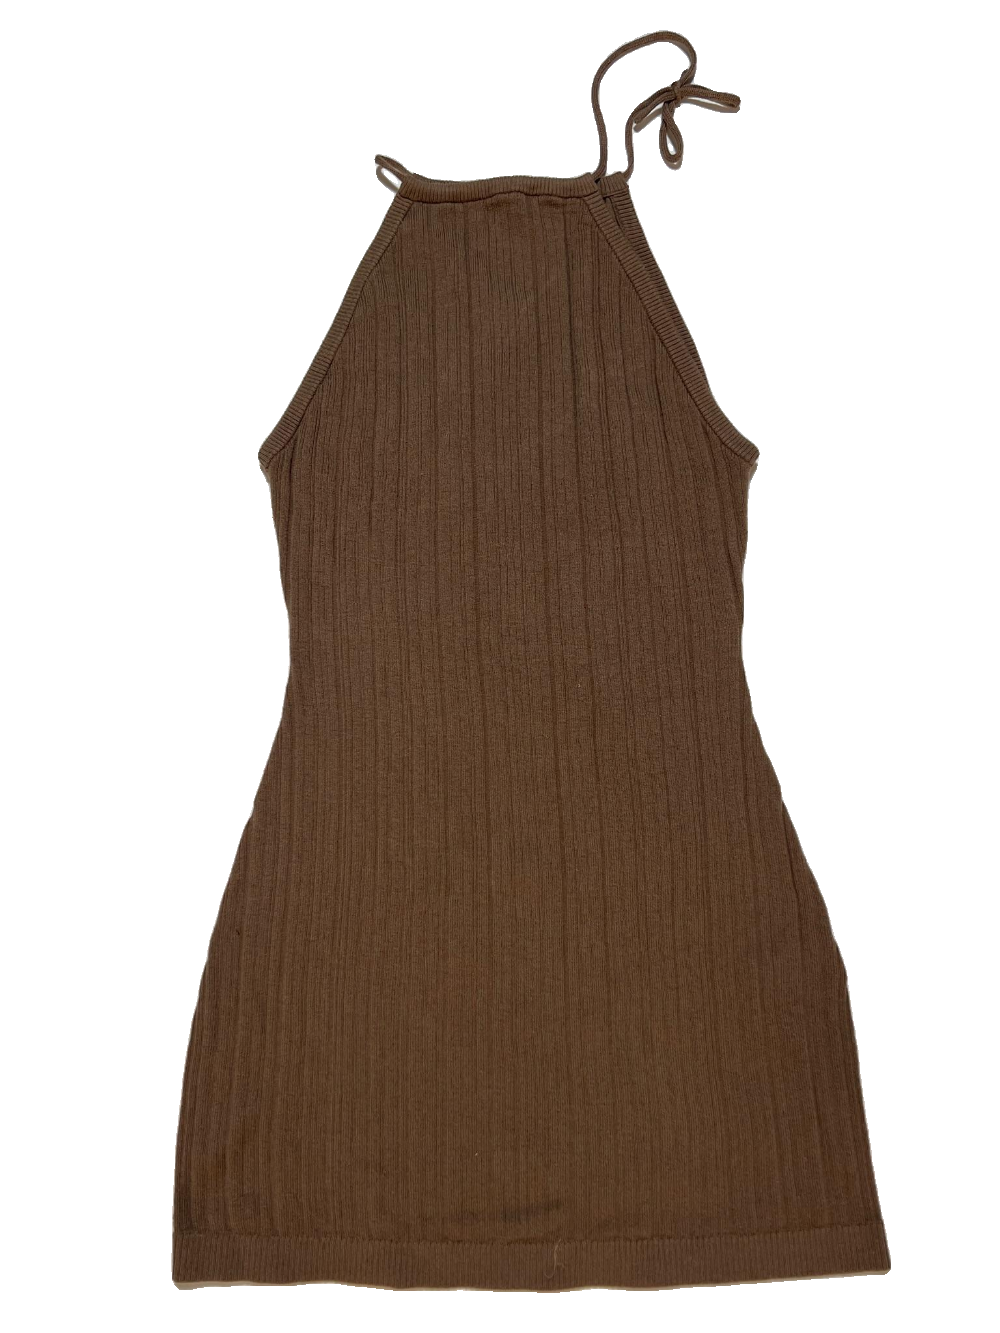 & Other Stories- Brown Ribbed Mini Dress